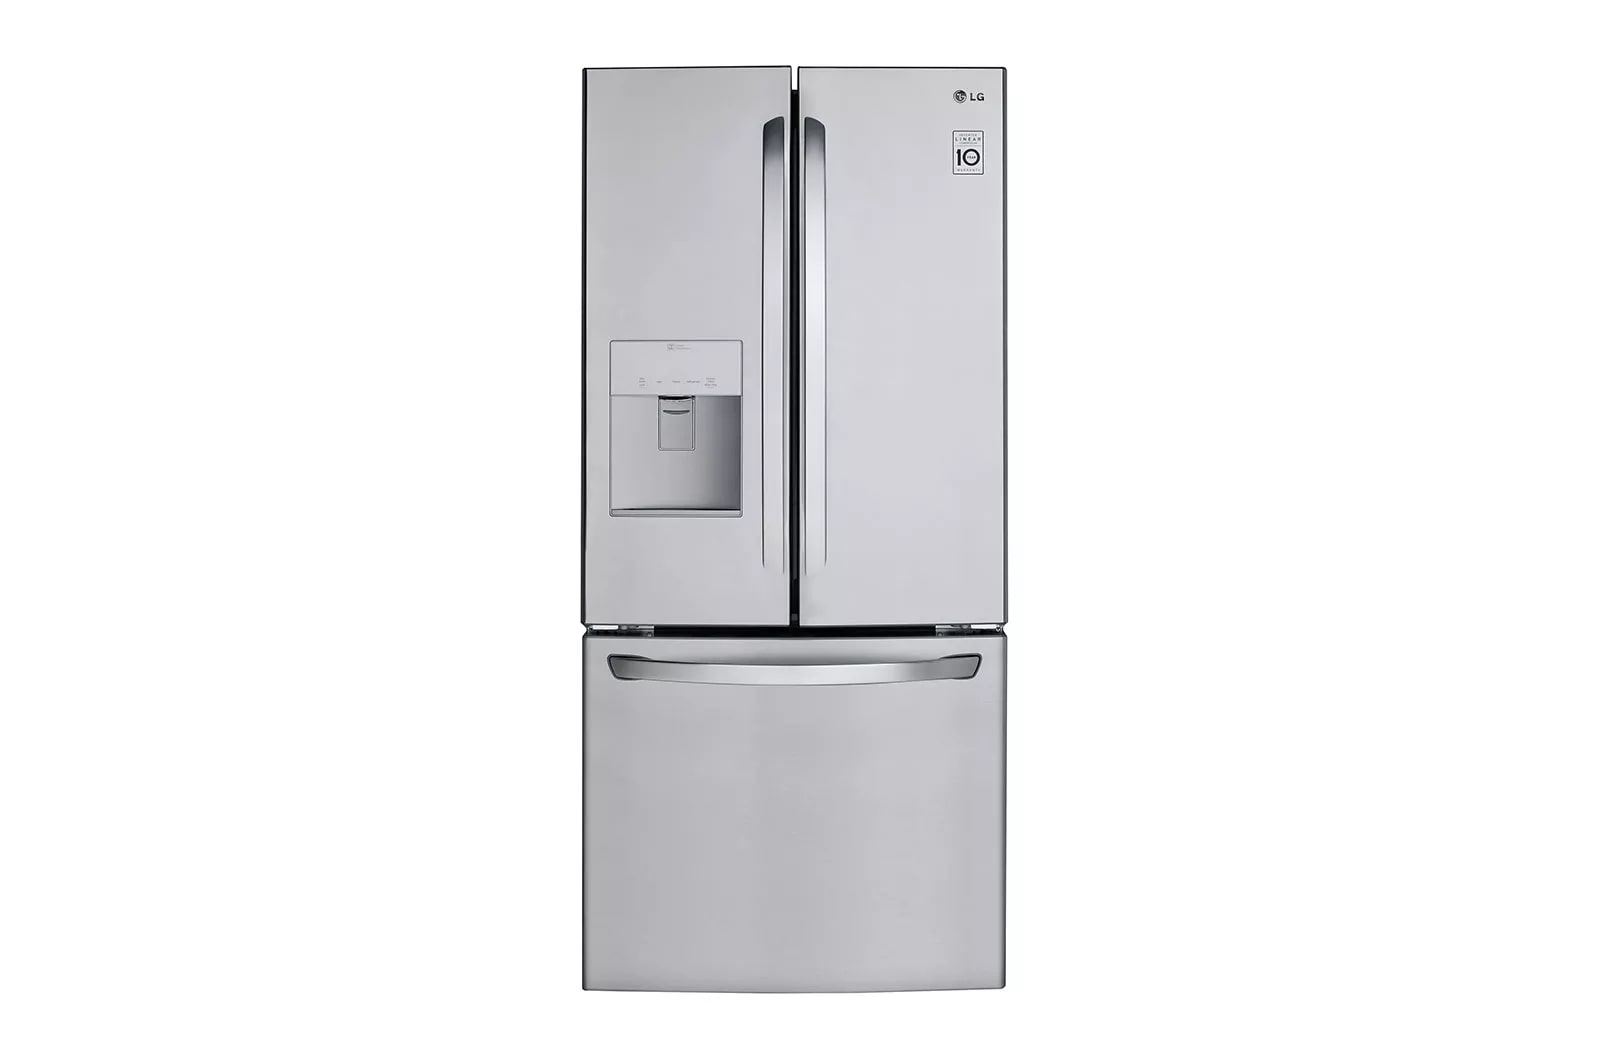 LG LFDS22520S 22 Cu. Ft. Stainless French Door Refrigerator - image 1 of 5